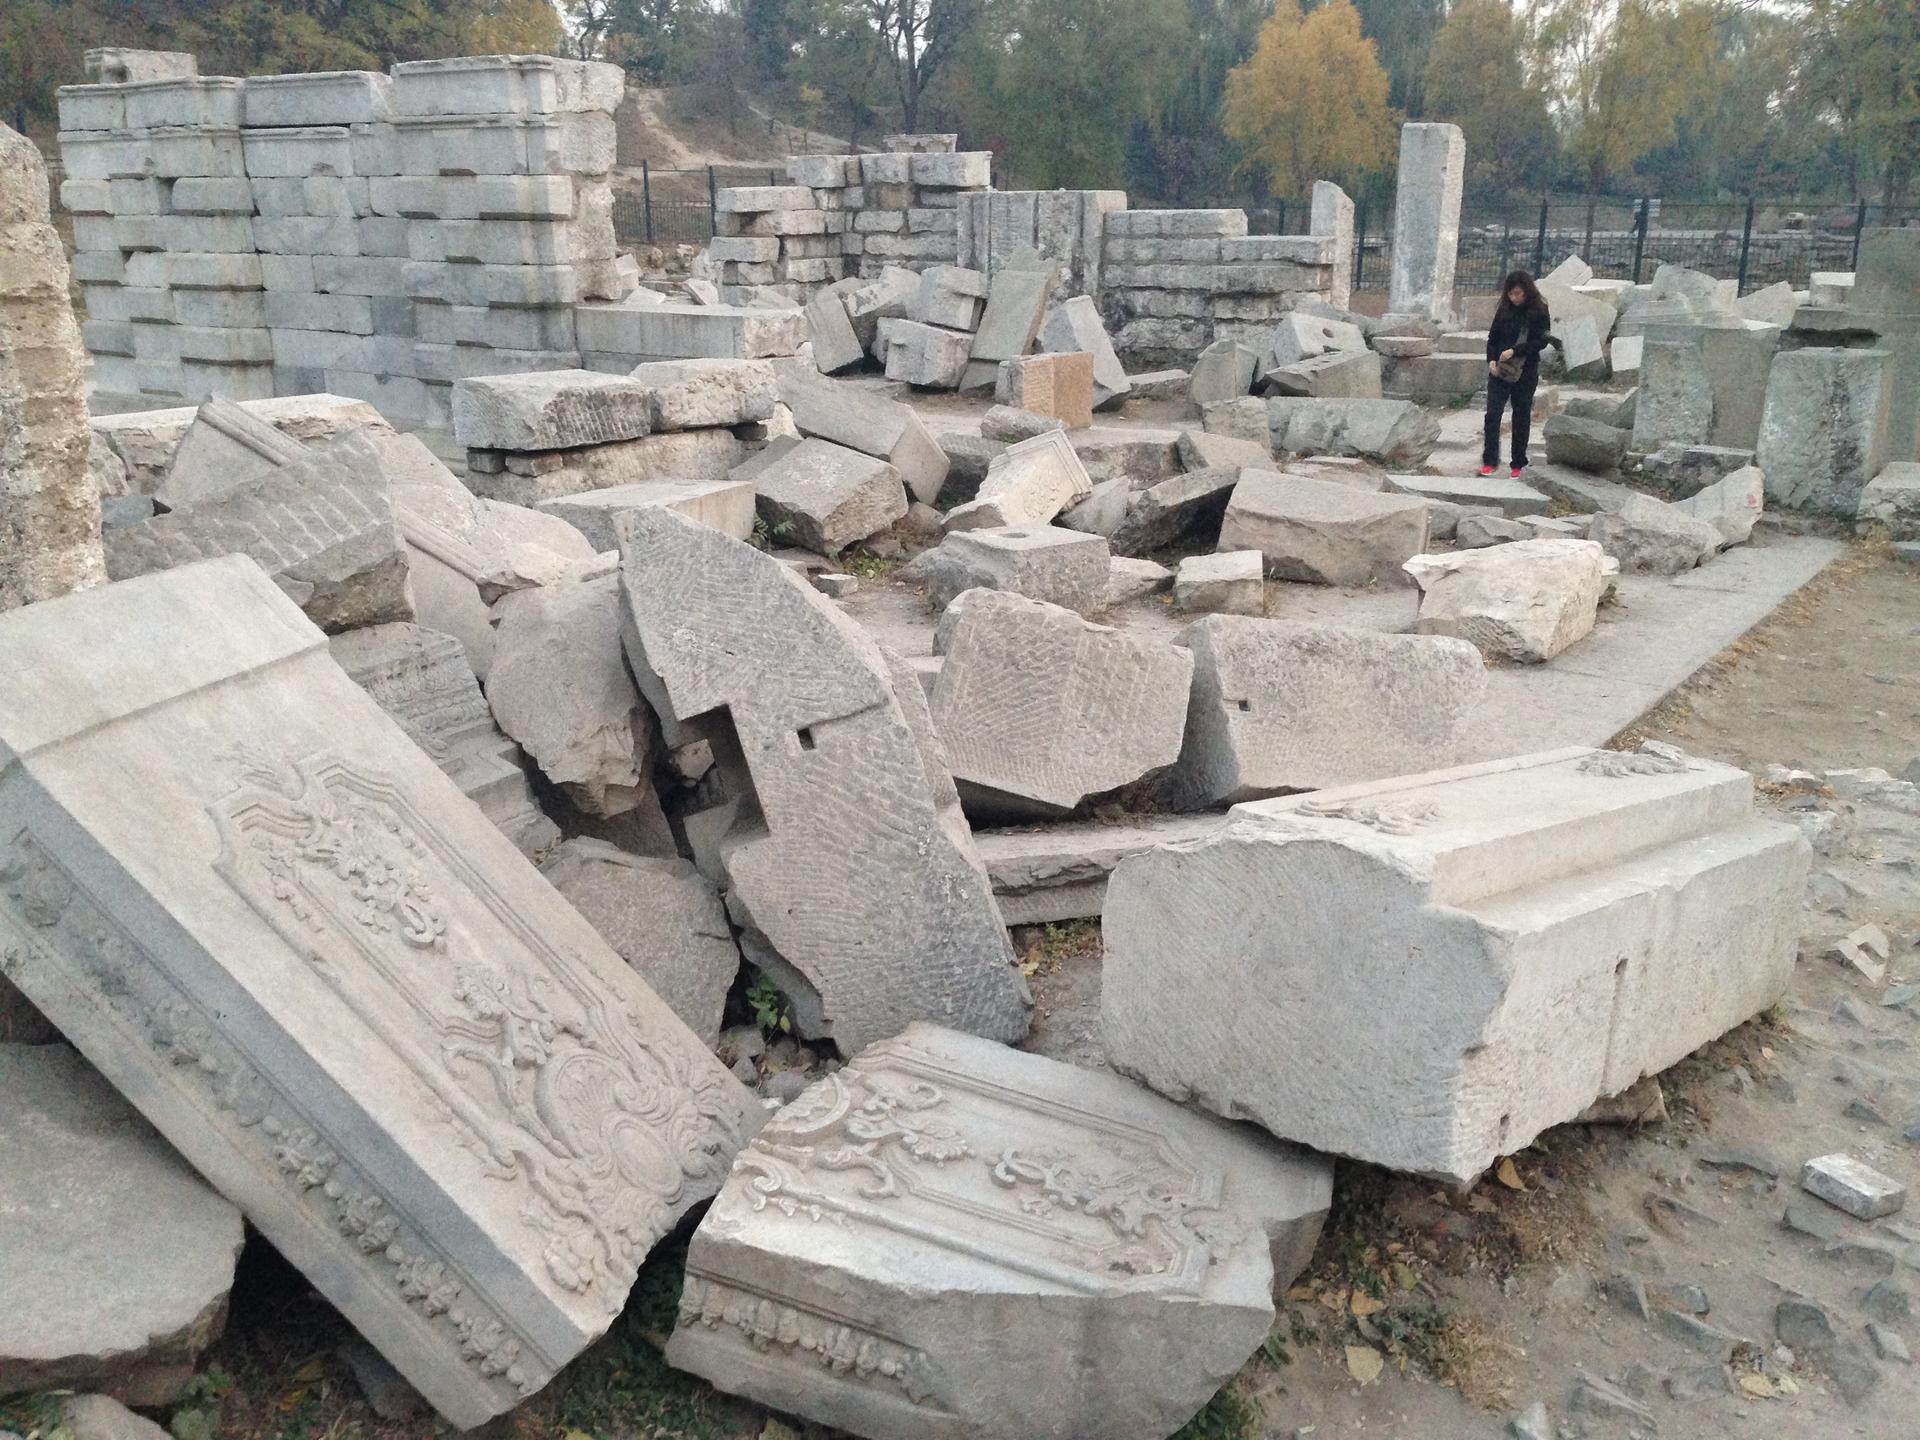 Some of the ruins at Yuanmingyuan in Beijing.